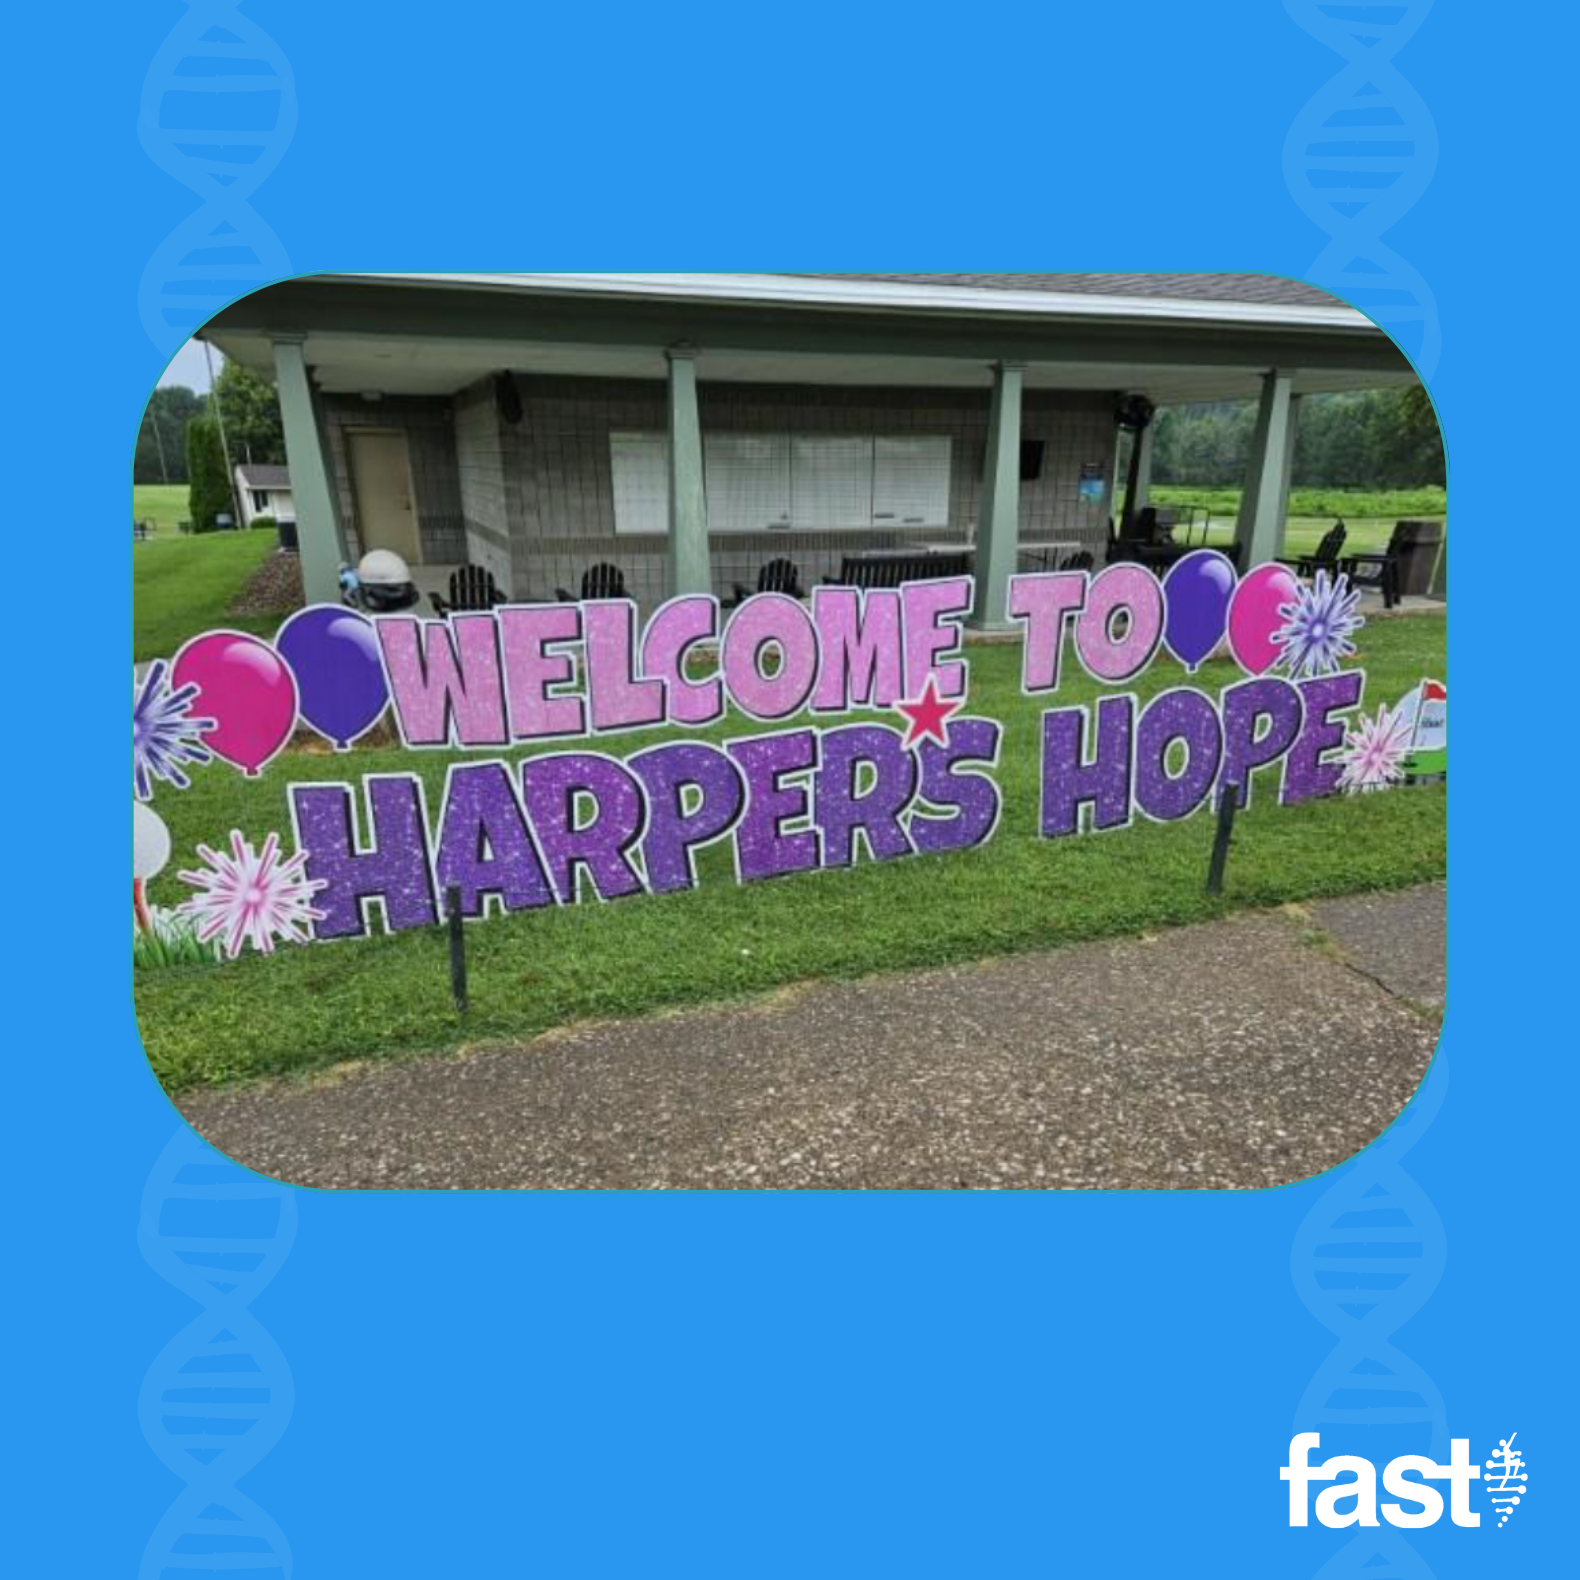 Photo of the Harper’s Hope event welcome sign